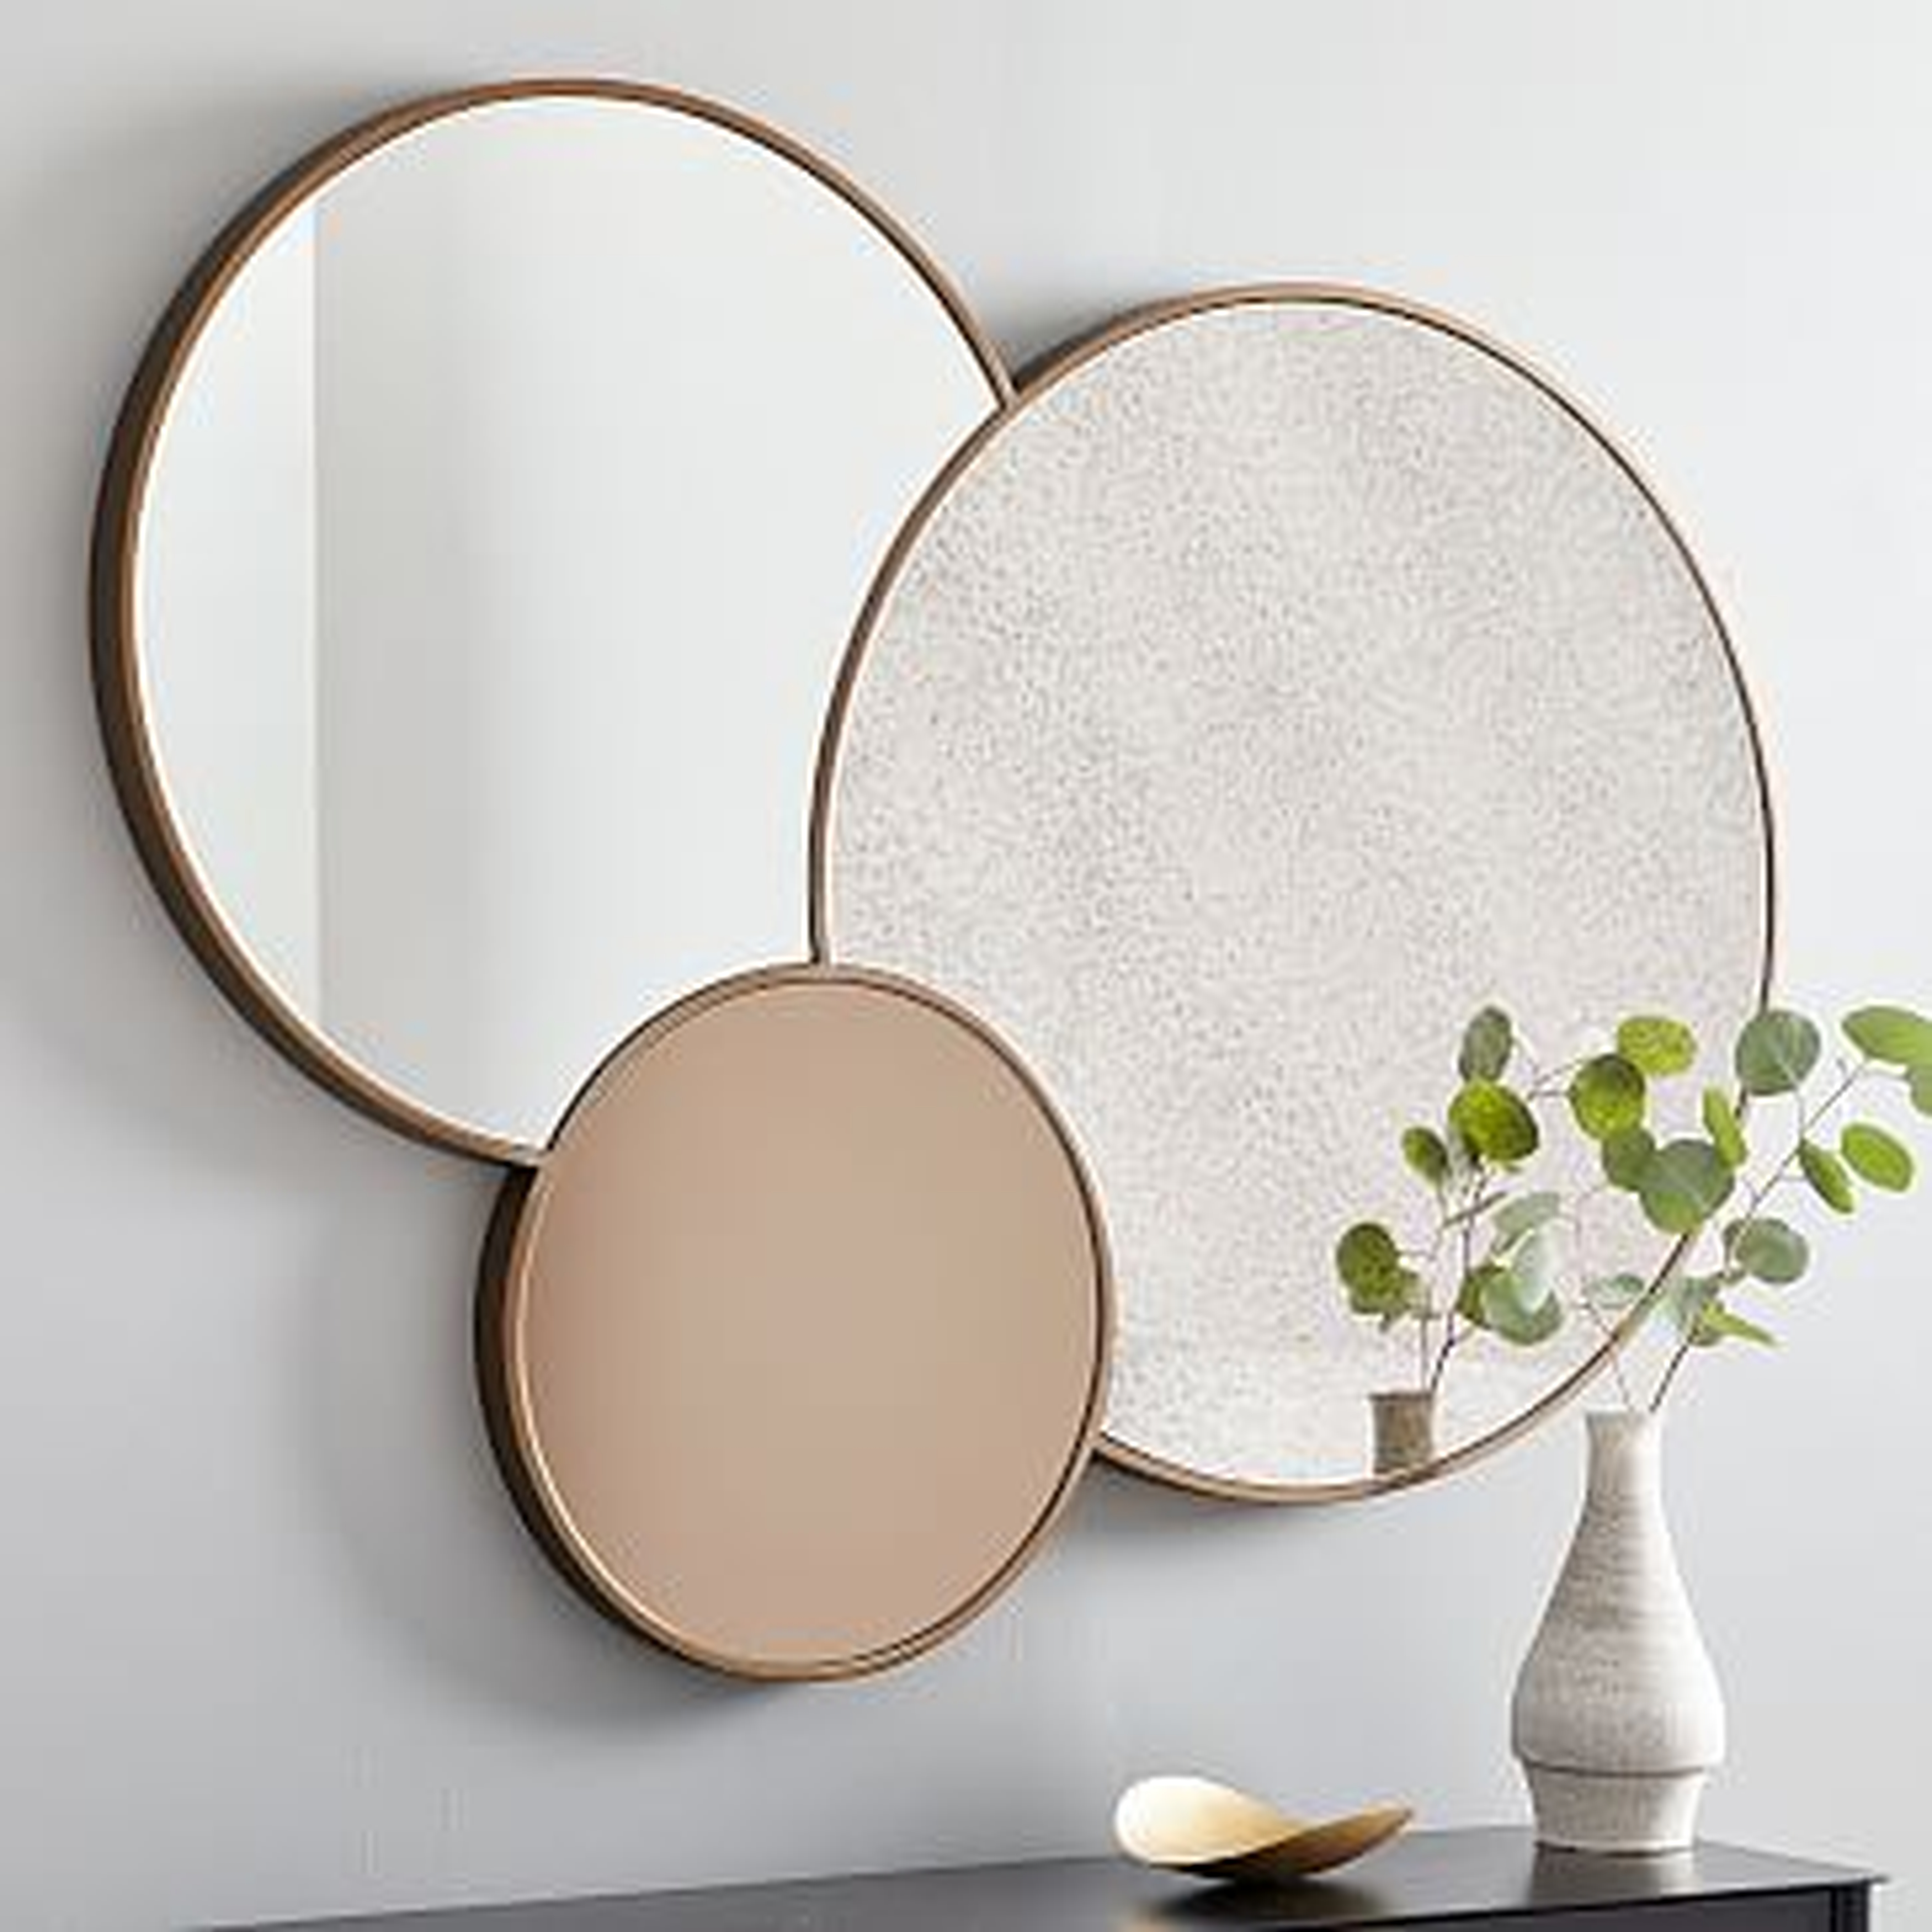 Graphic Stone Mirror Clear/Foxed/Tinted Large - West Elm